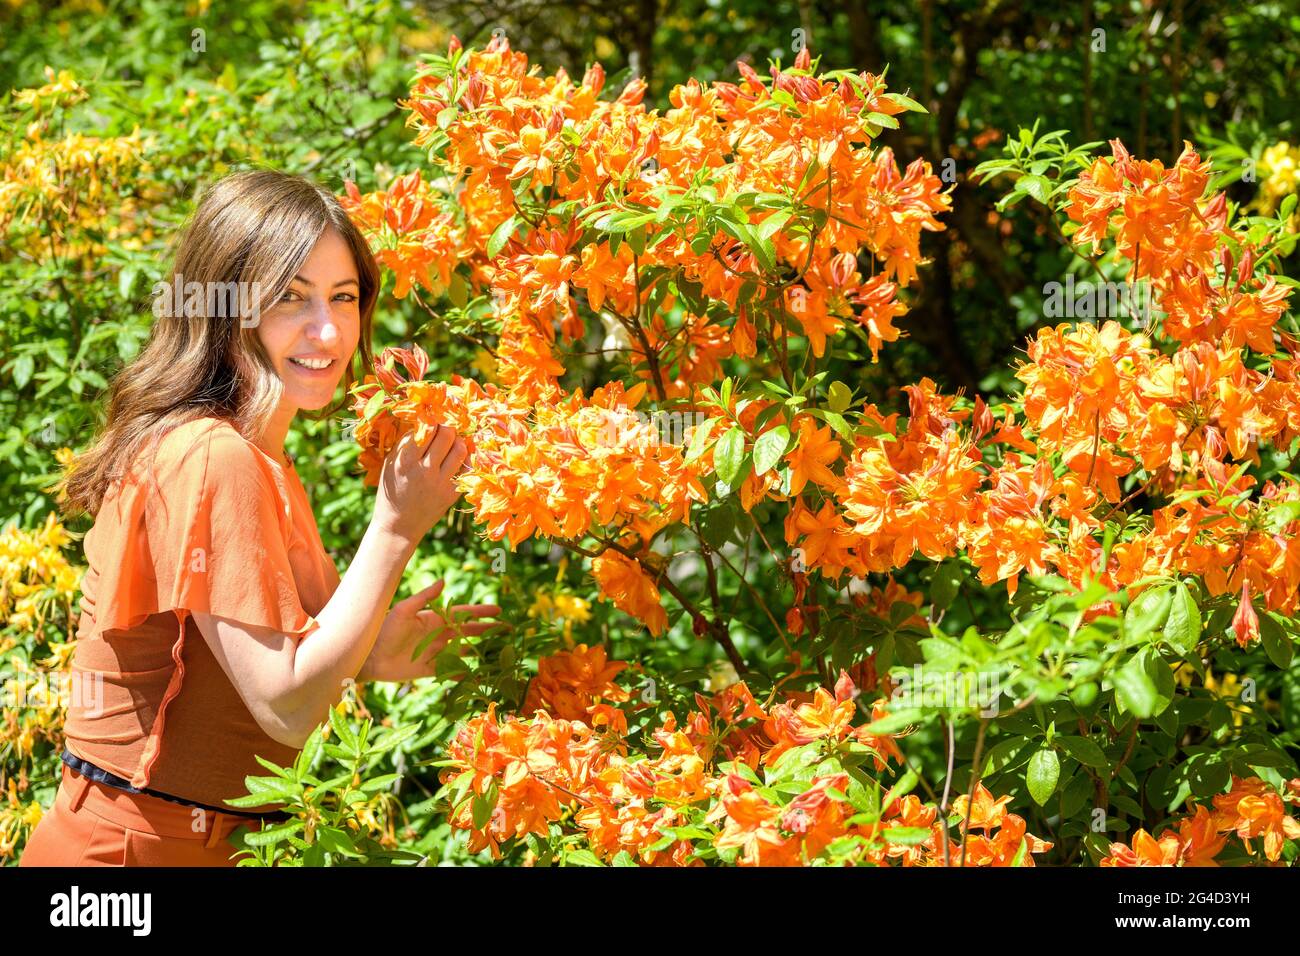 Trendy woman in matching outfit admiring colorful orange azaleas in spring looking back at the camera with a happy friendly smile Stock Photo